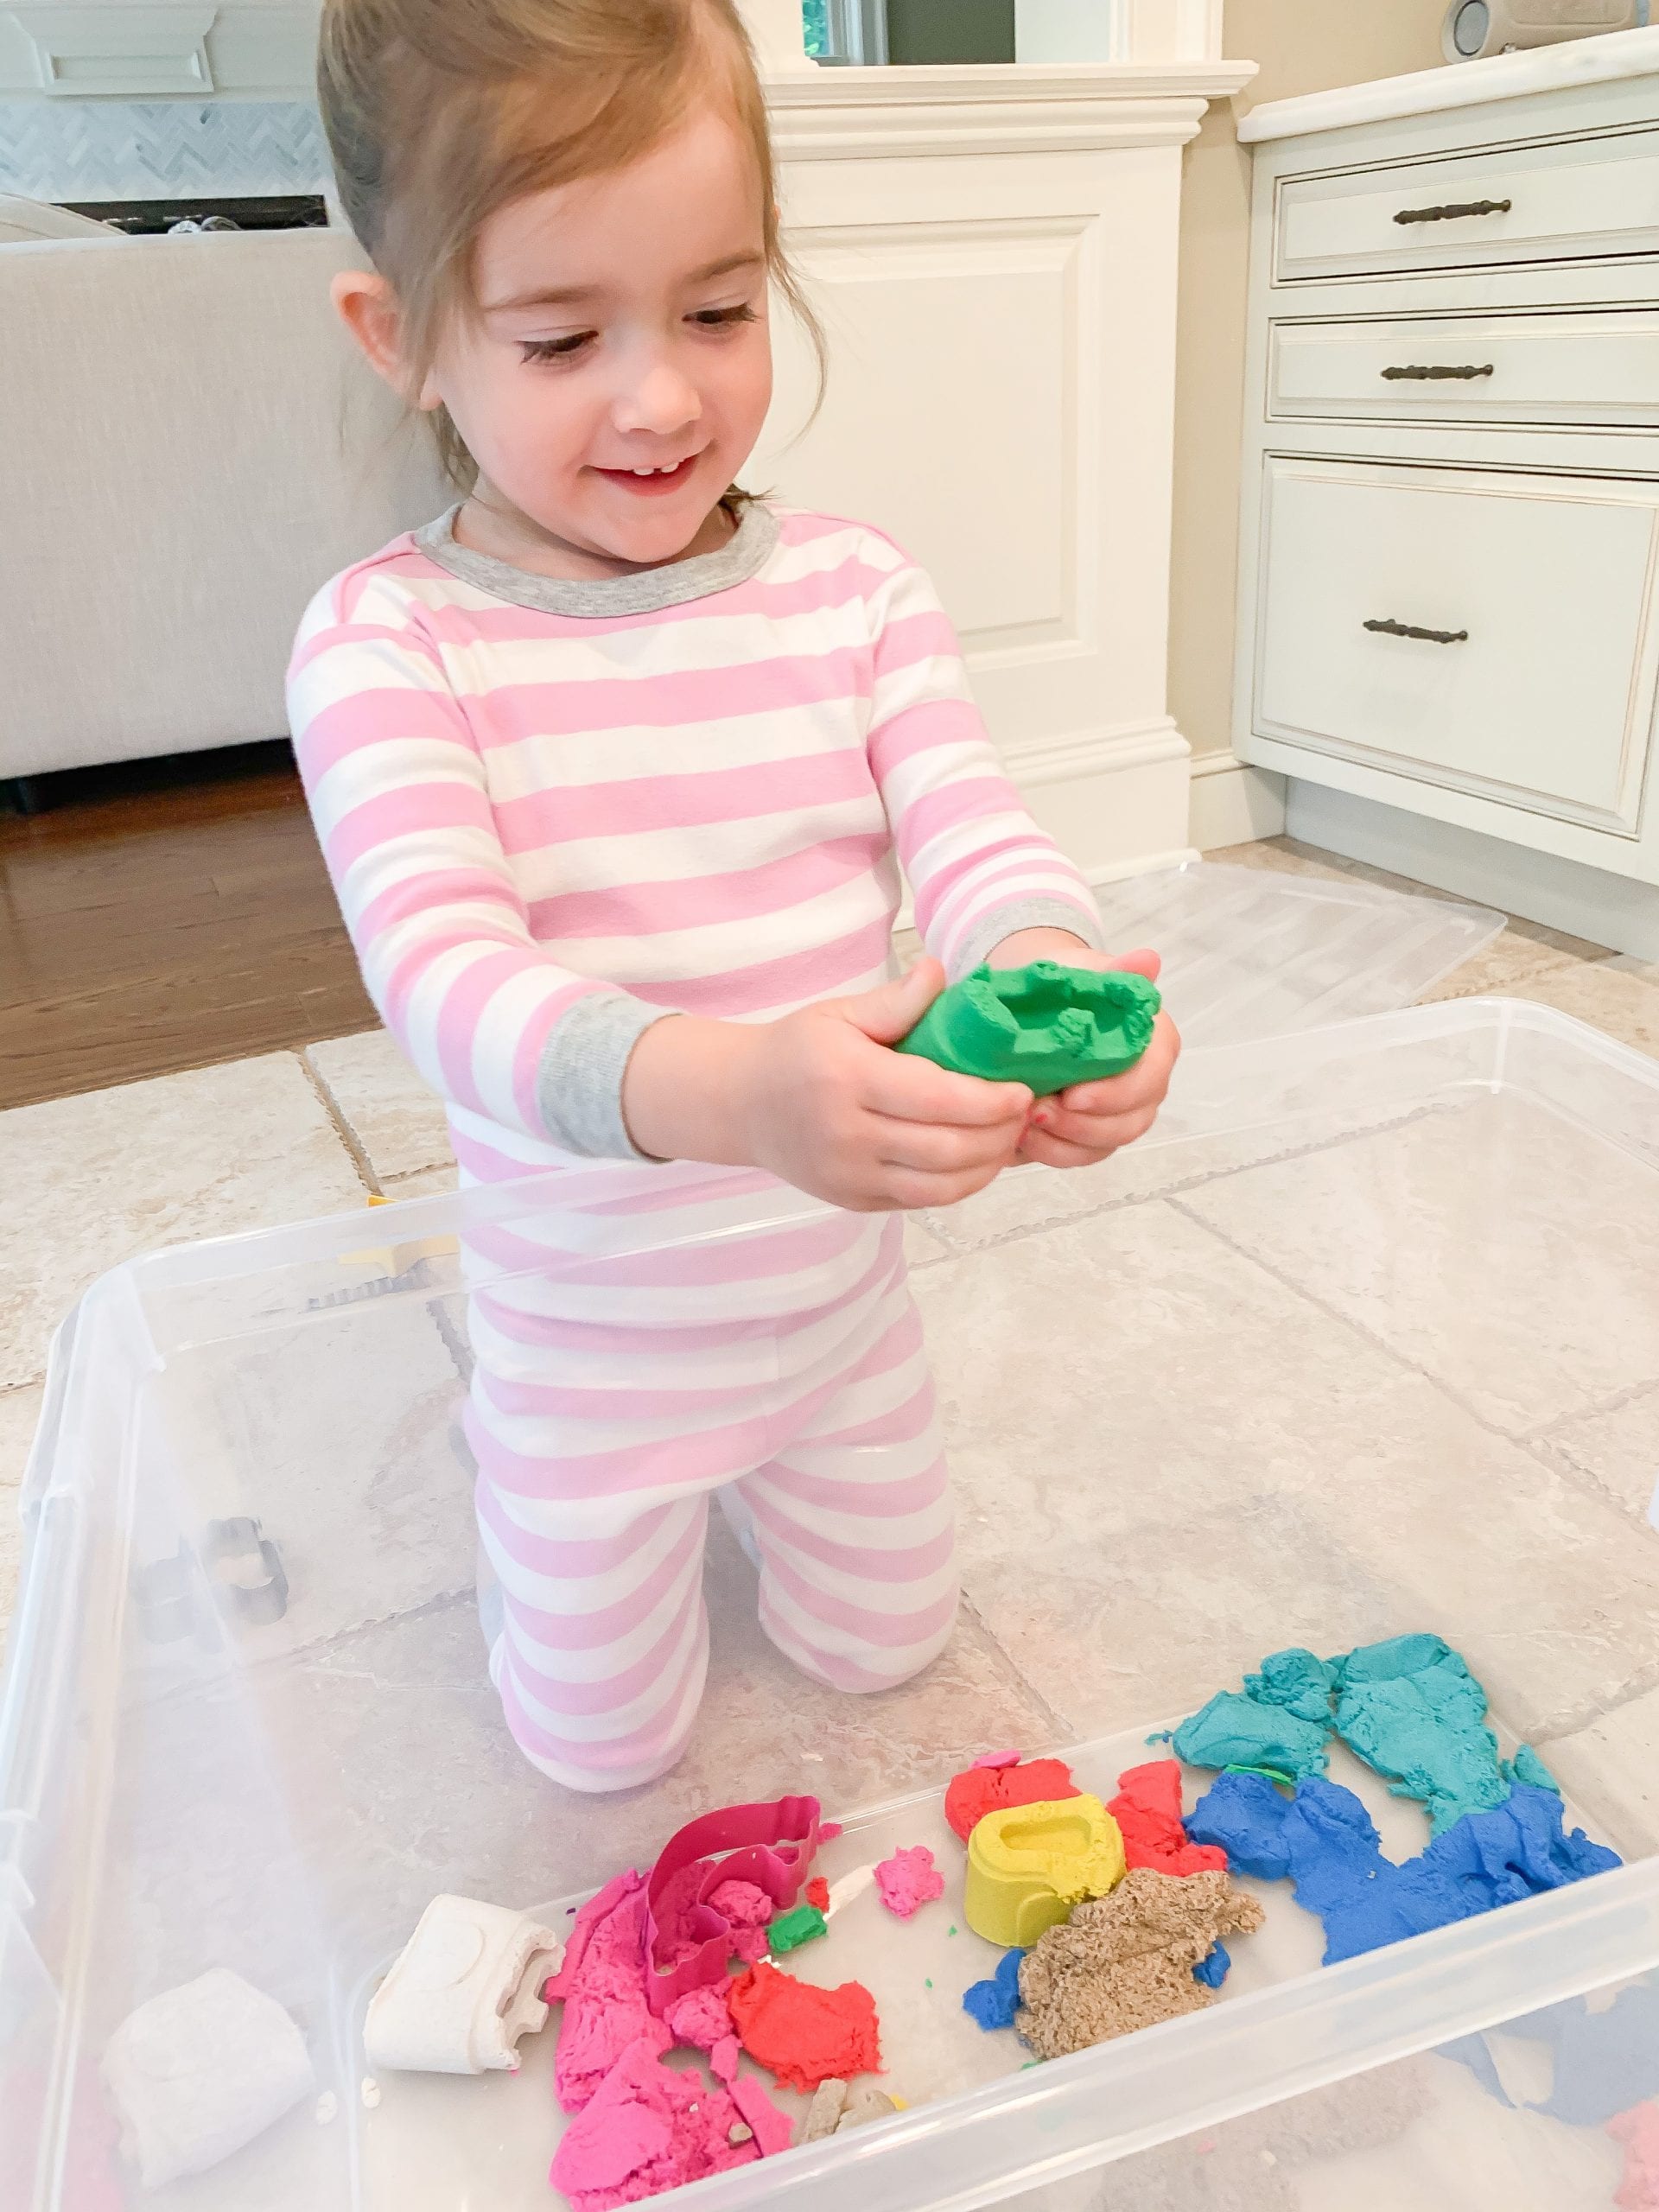 Kinetic Sand - What is it and how do you play with it?